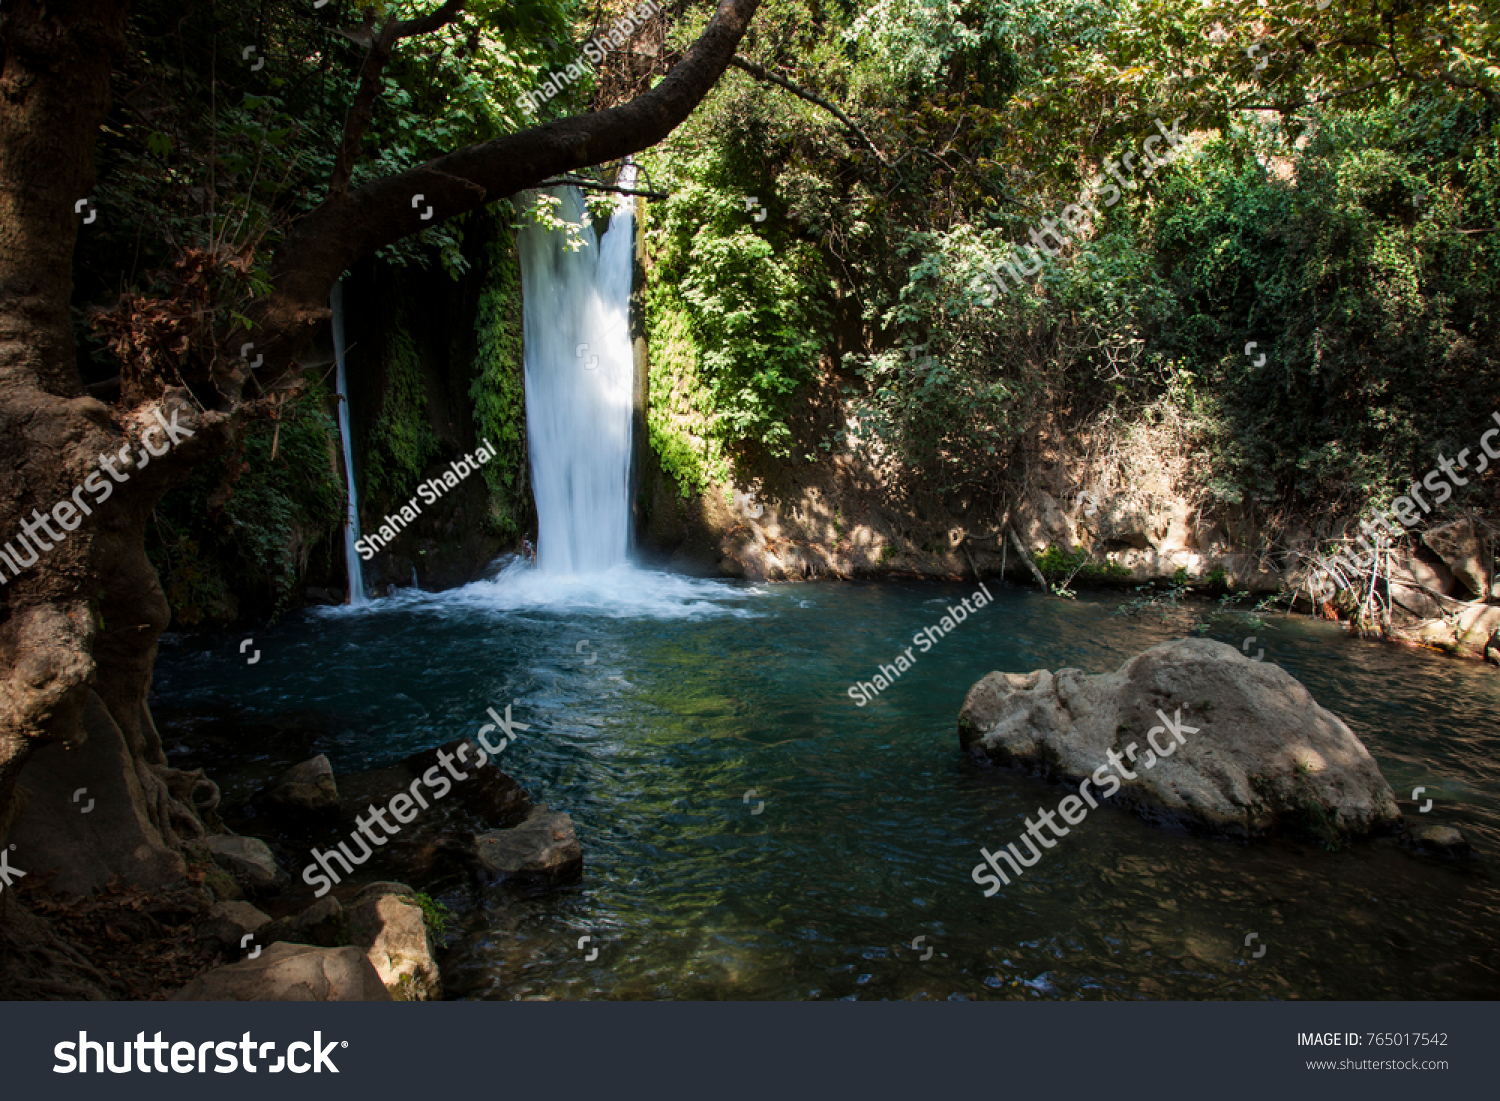 Banias Waterfall in the Golan Heights Israel #765017542